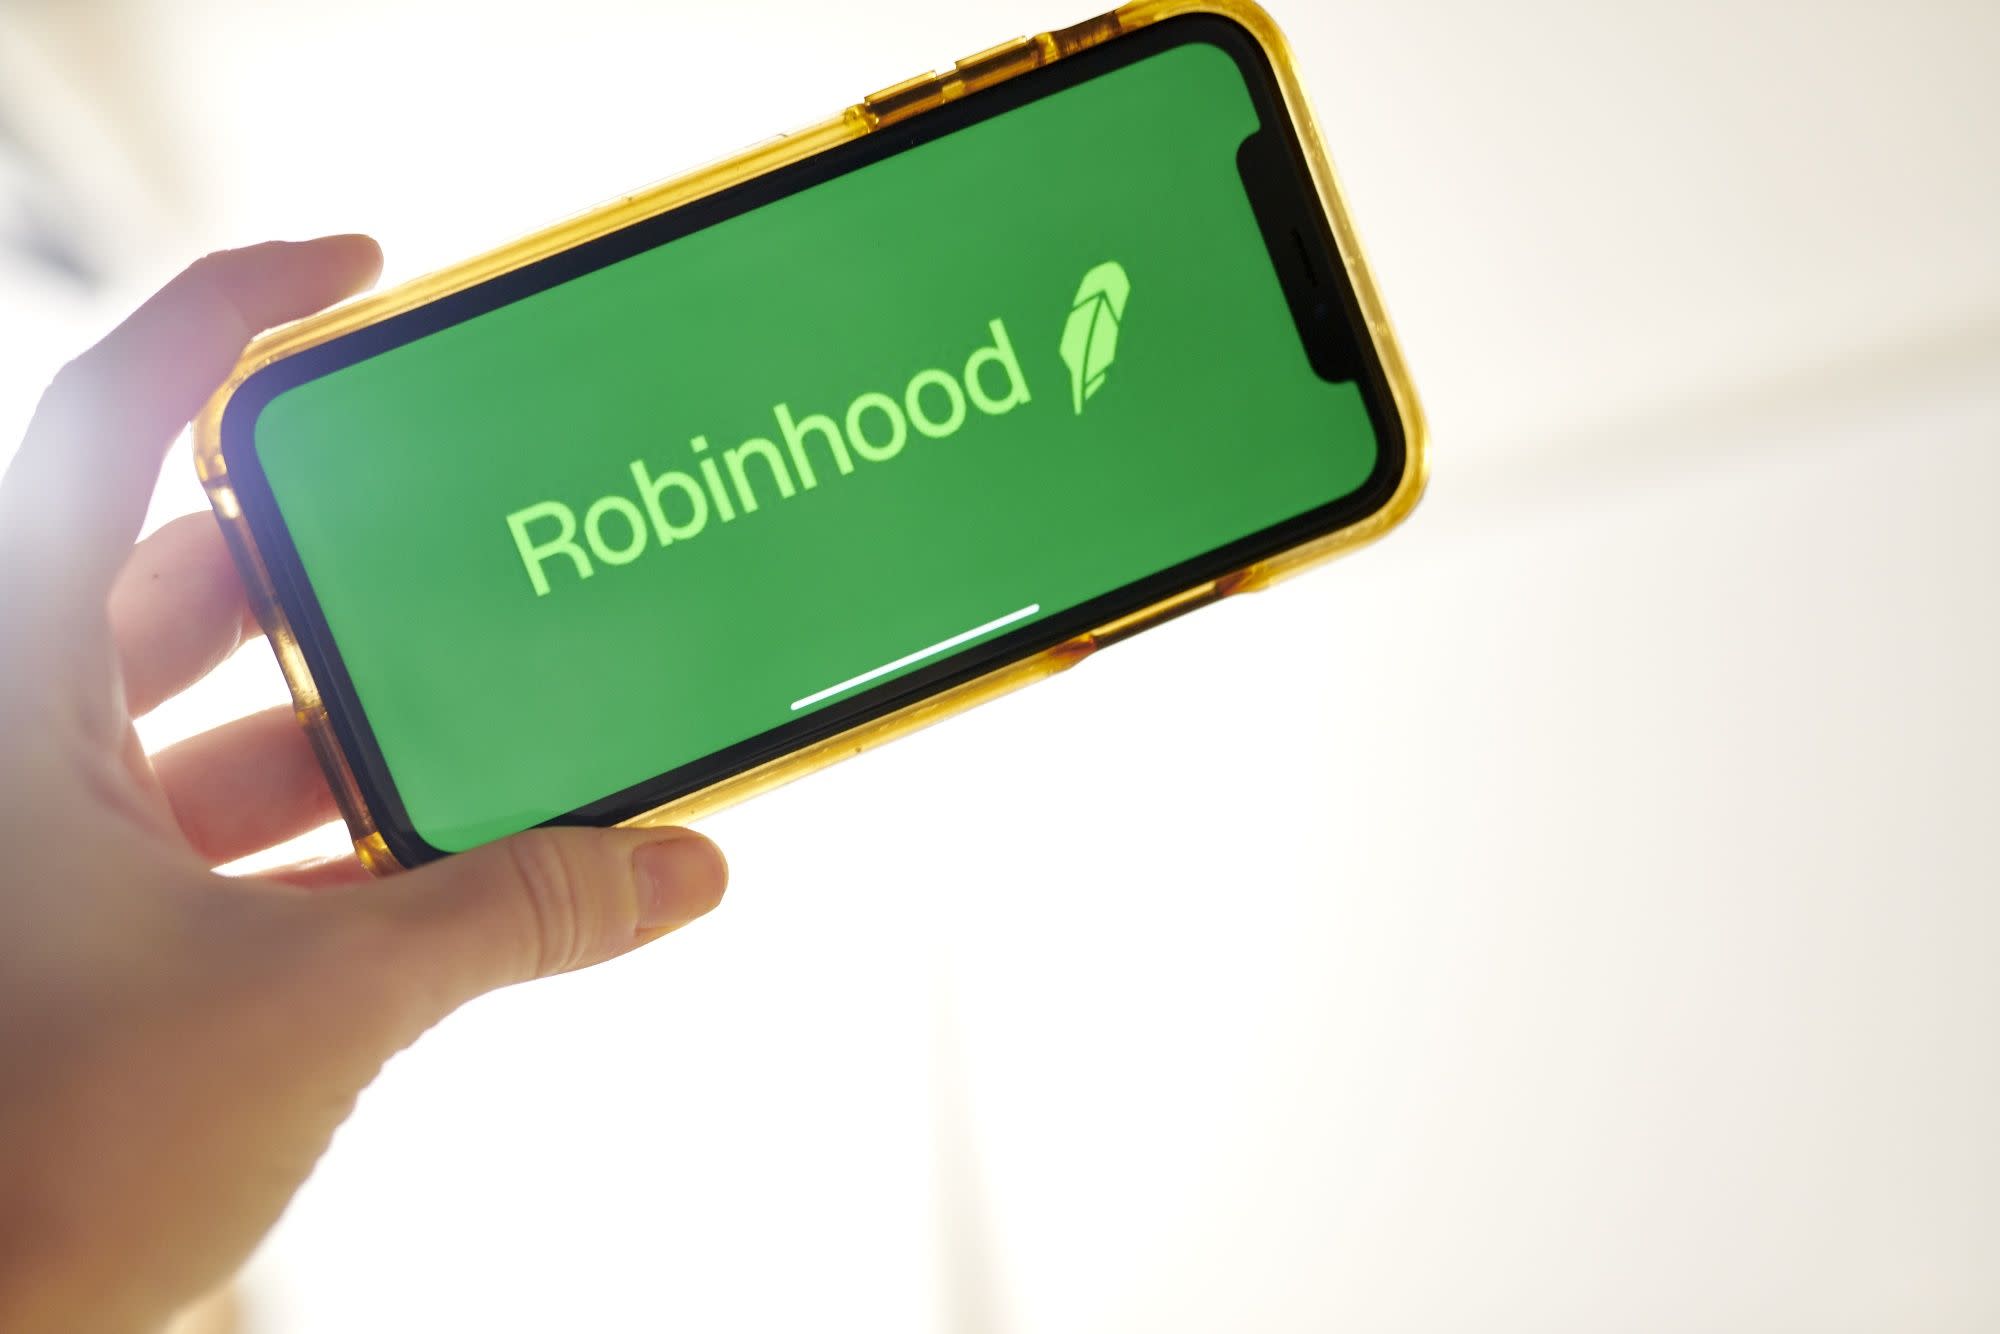 Robinhood plans to schedule confidential IPO filing as soon as March